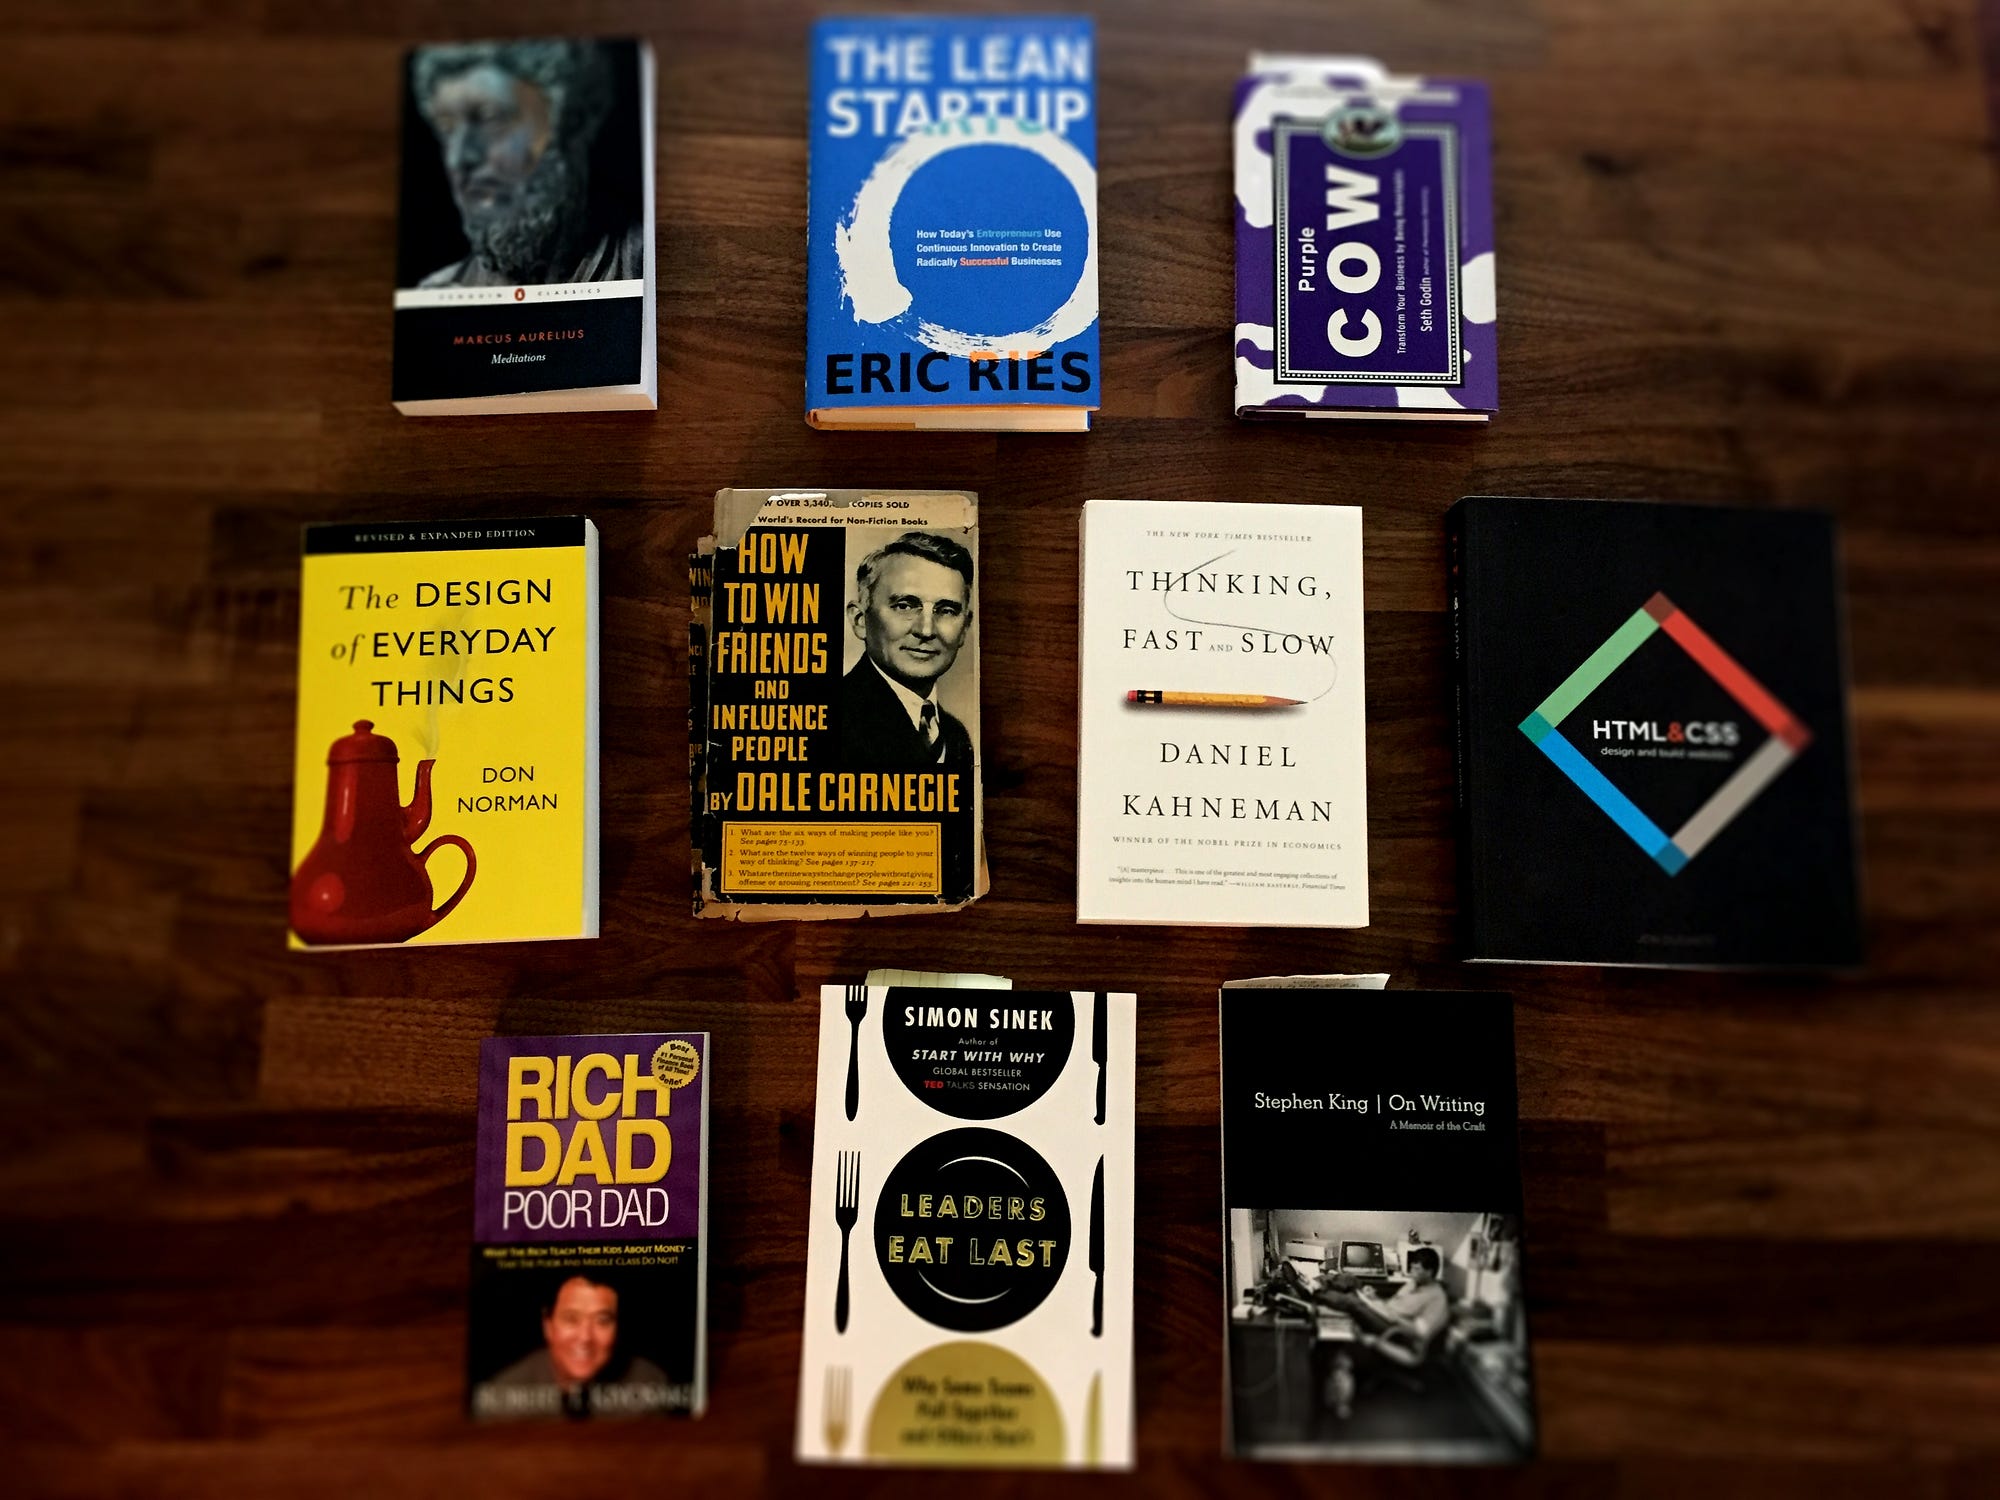 These 10 Useful Books Will Change Your Life, by Dave Hamrick